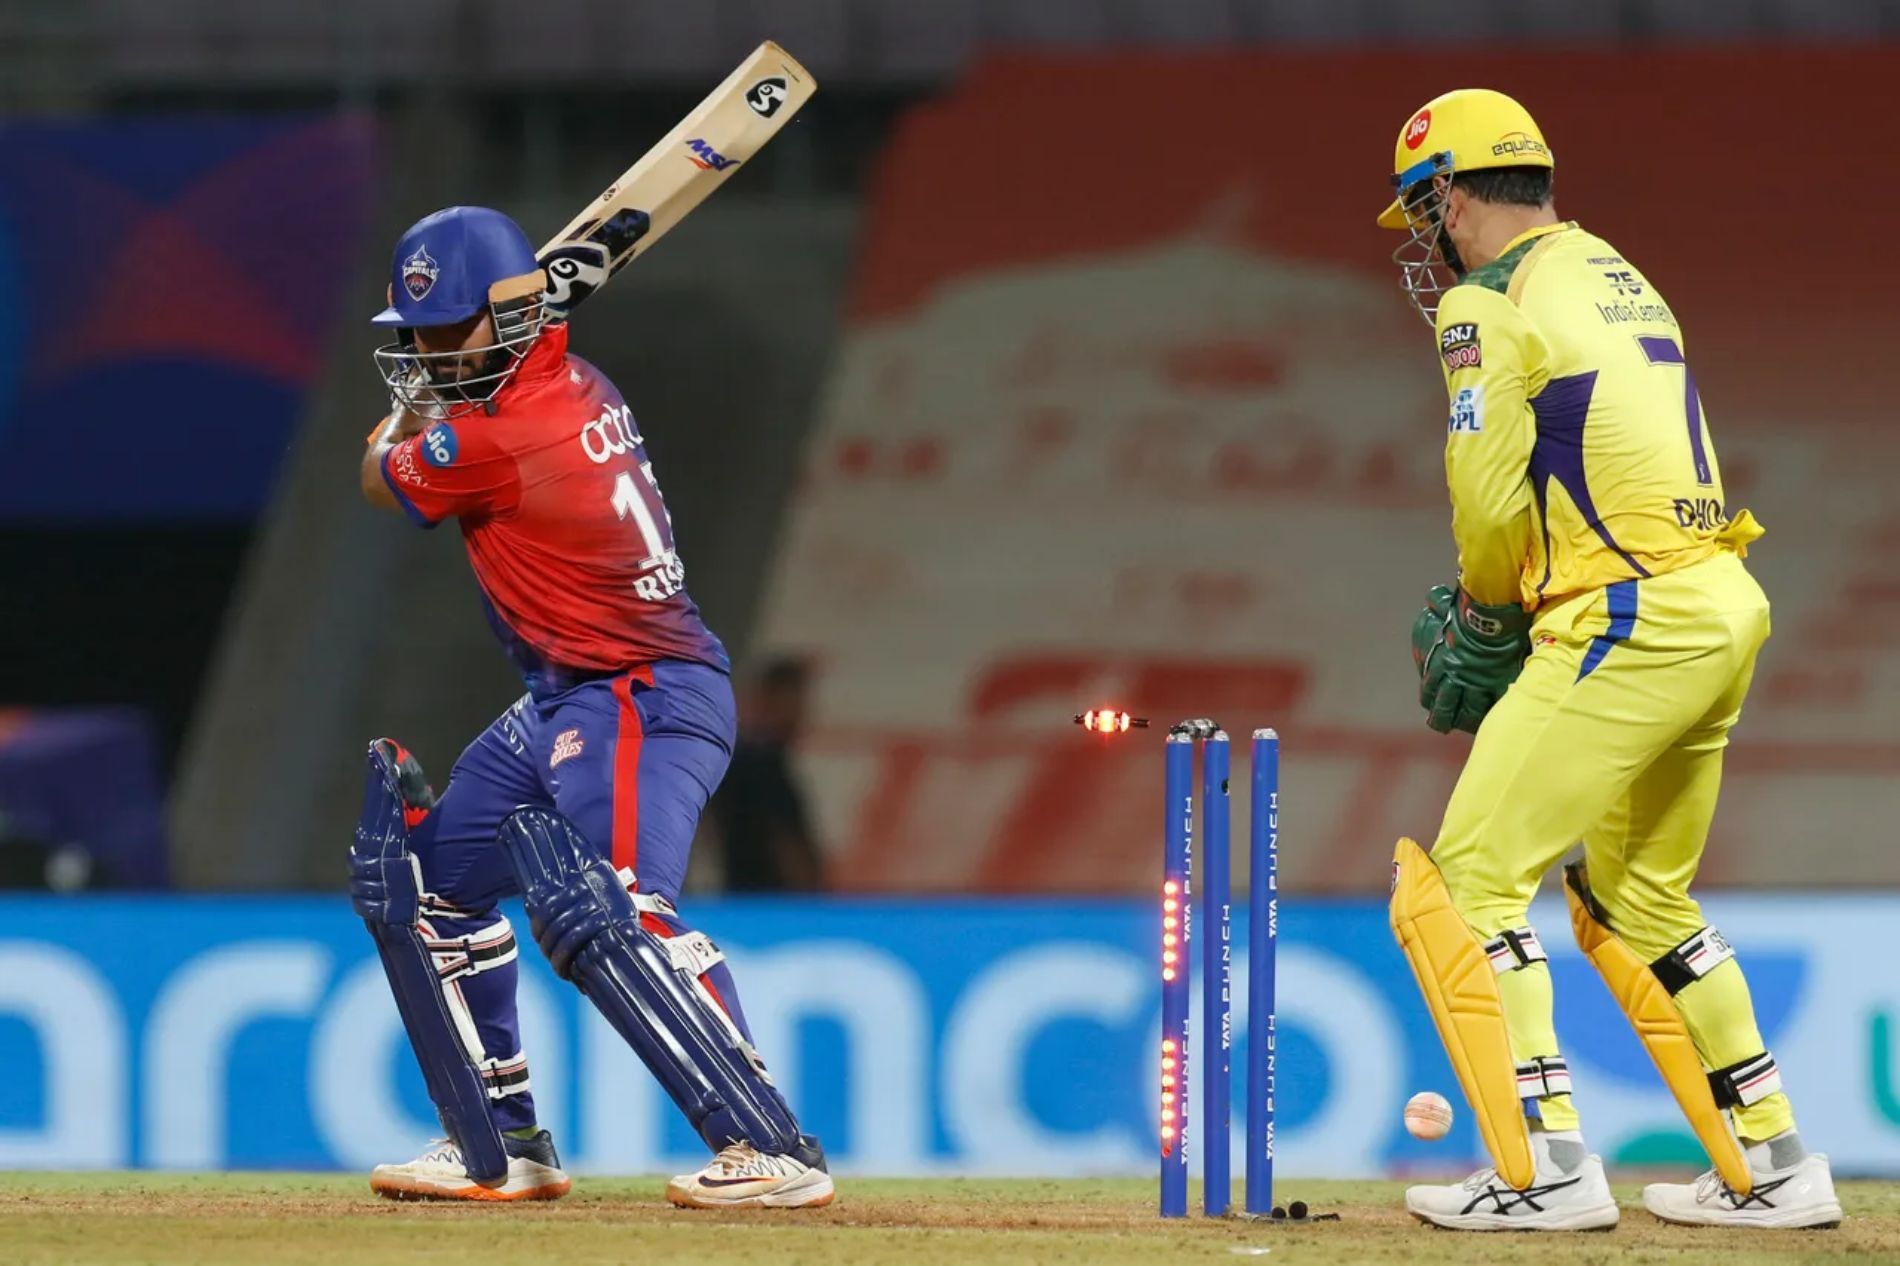 Rishabh Pant is cleaned up by Moeen Ali. Pic: IPLT20.COM